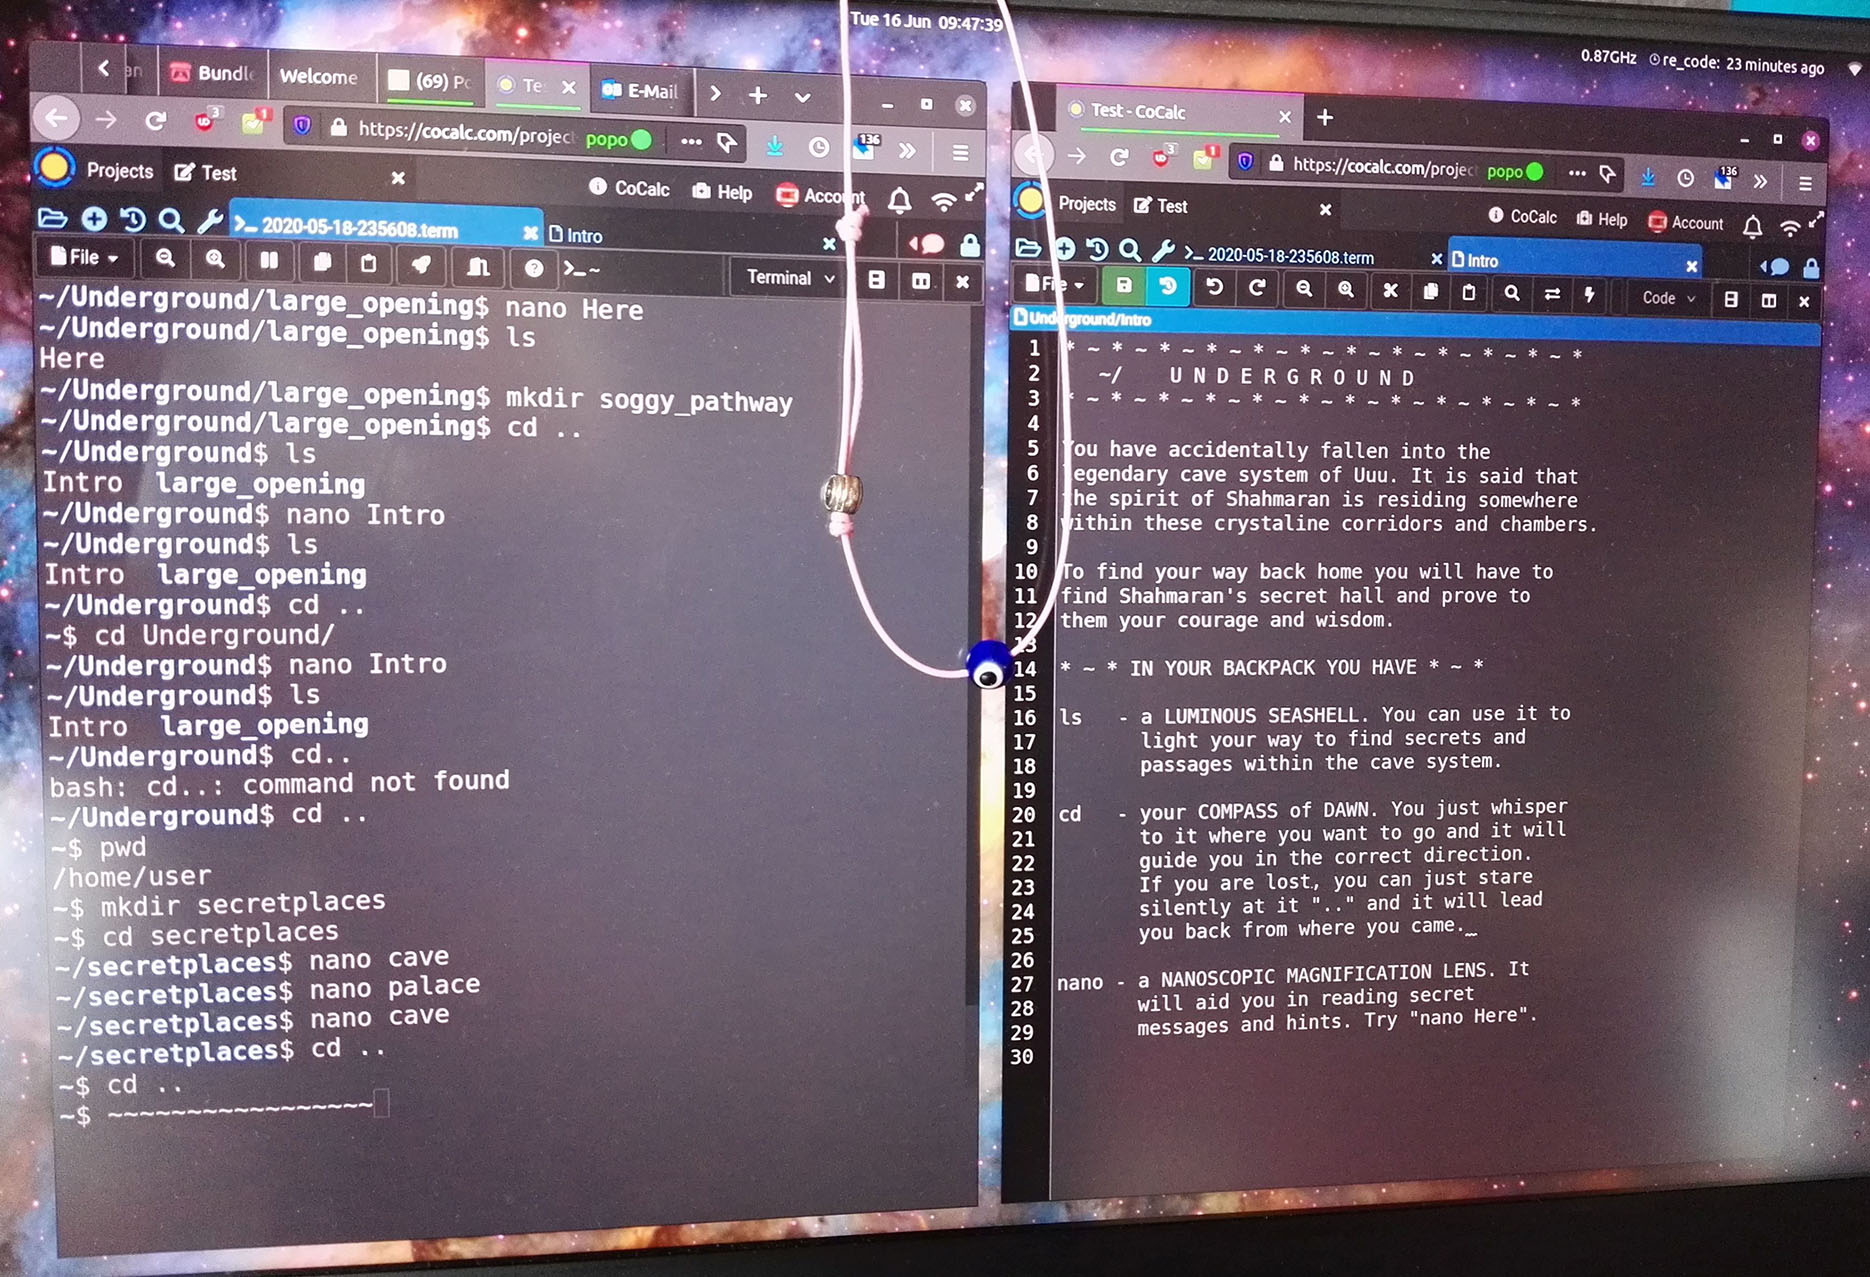 On a galaxy desktop background, two terminal windows are open. On the left window there is code and some of the commands read: "underground", "secretplaces", and "large openings". On the right side is another terminal which says at the top "UNDERGROUND" in all capital letters. Hung ontop of the screen is an evil eye on a pink string.